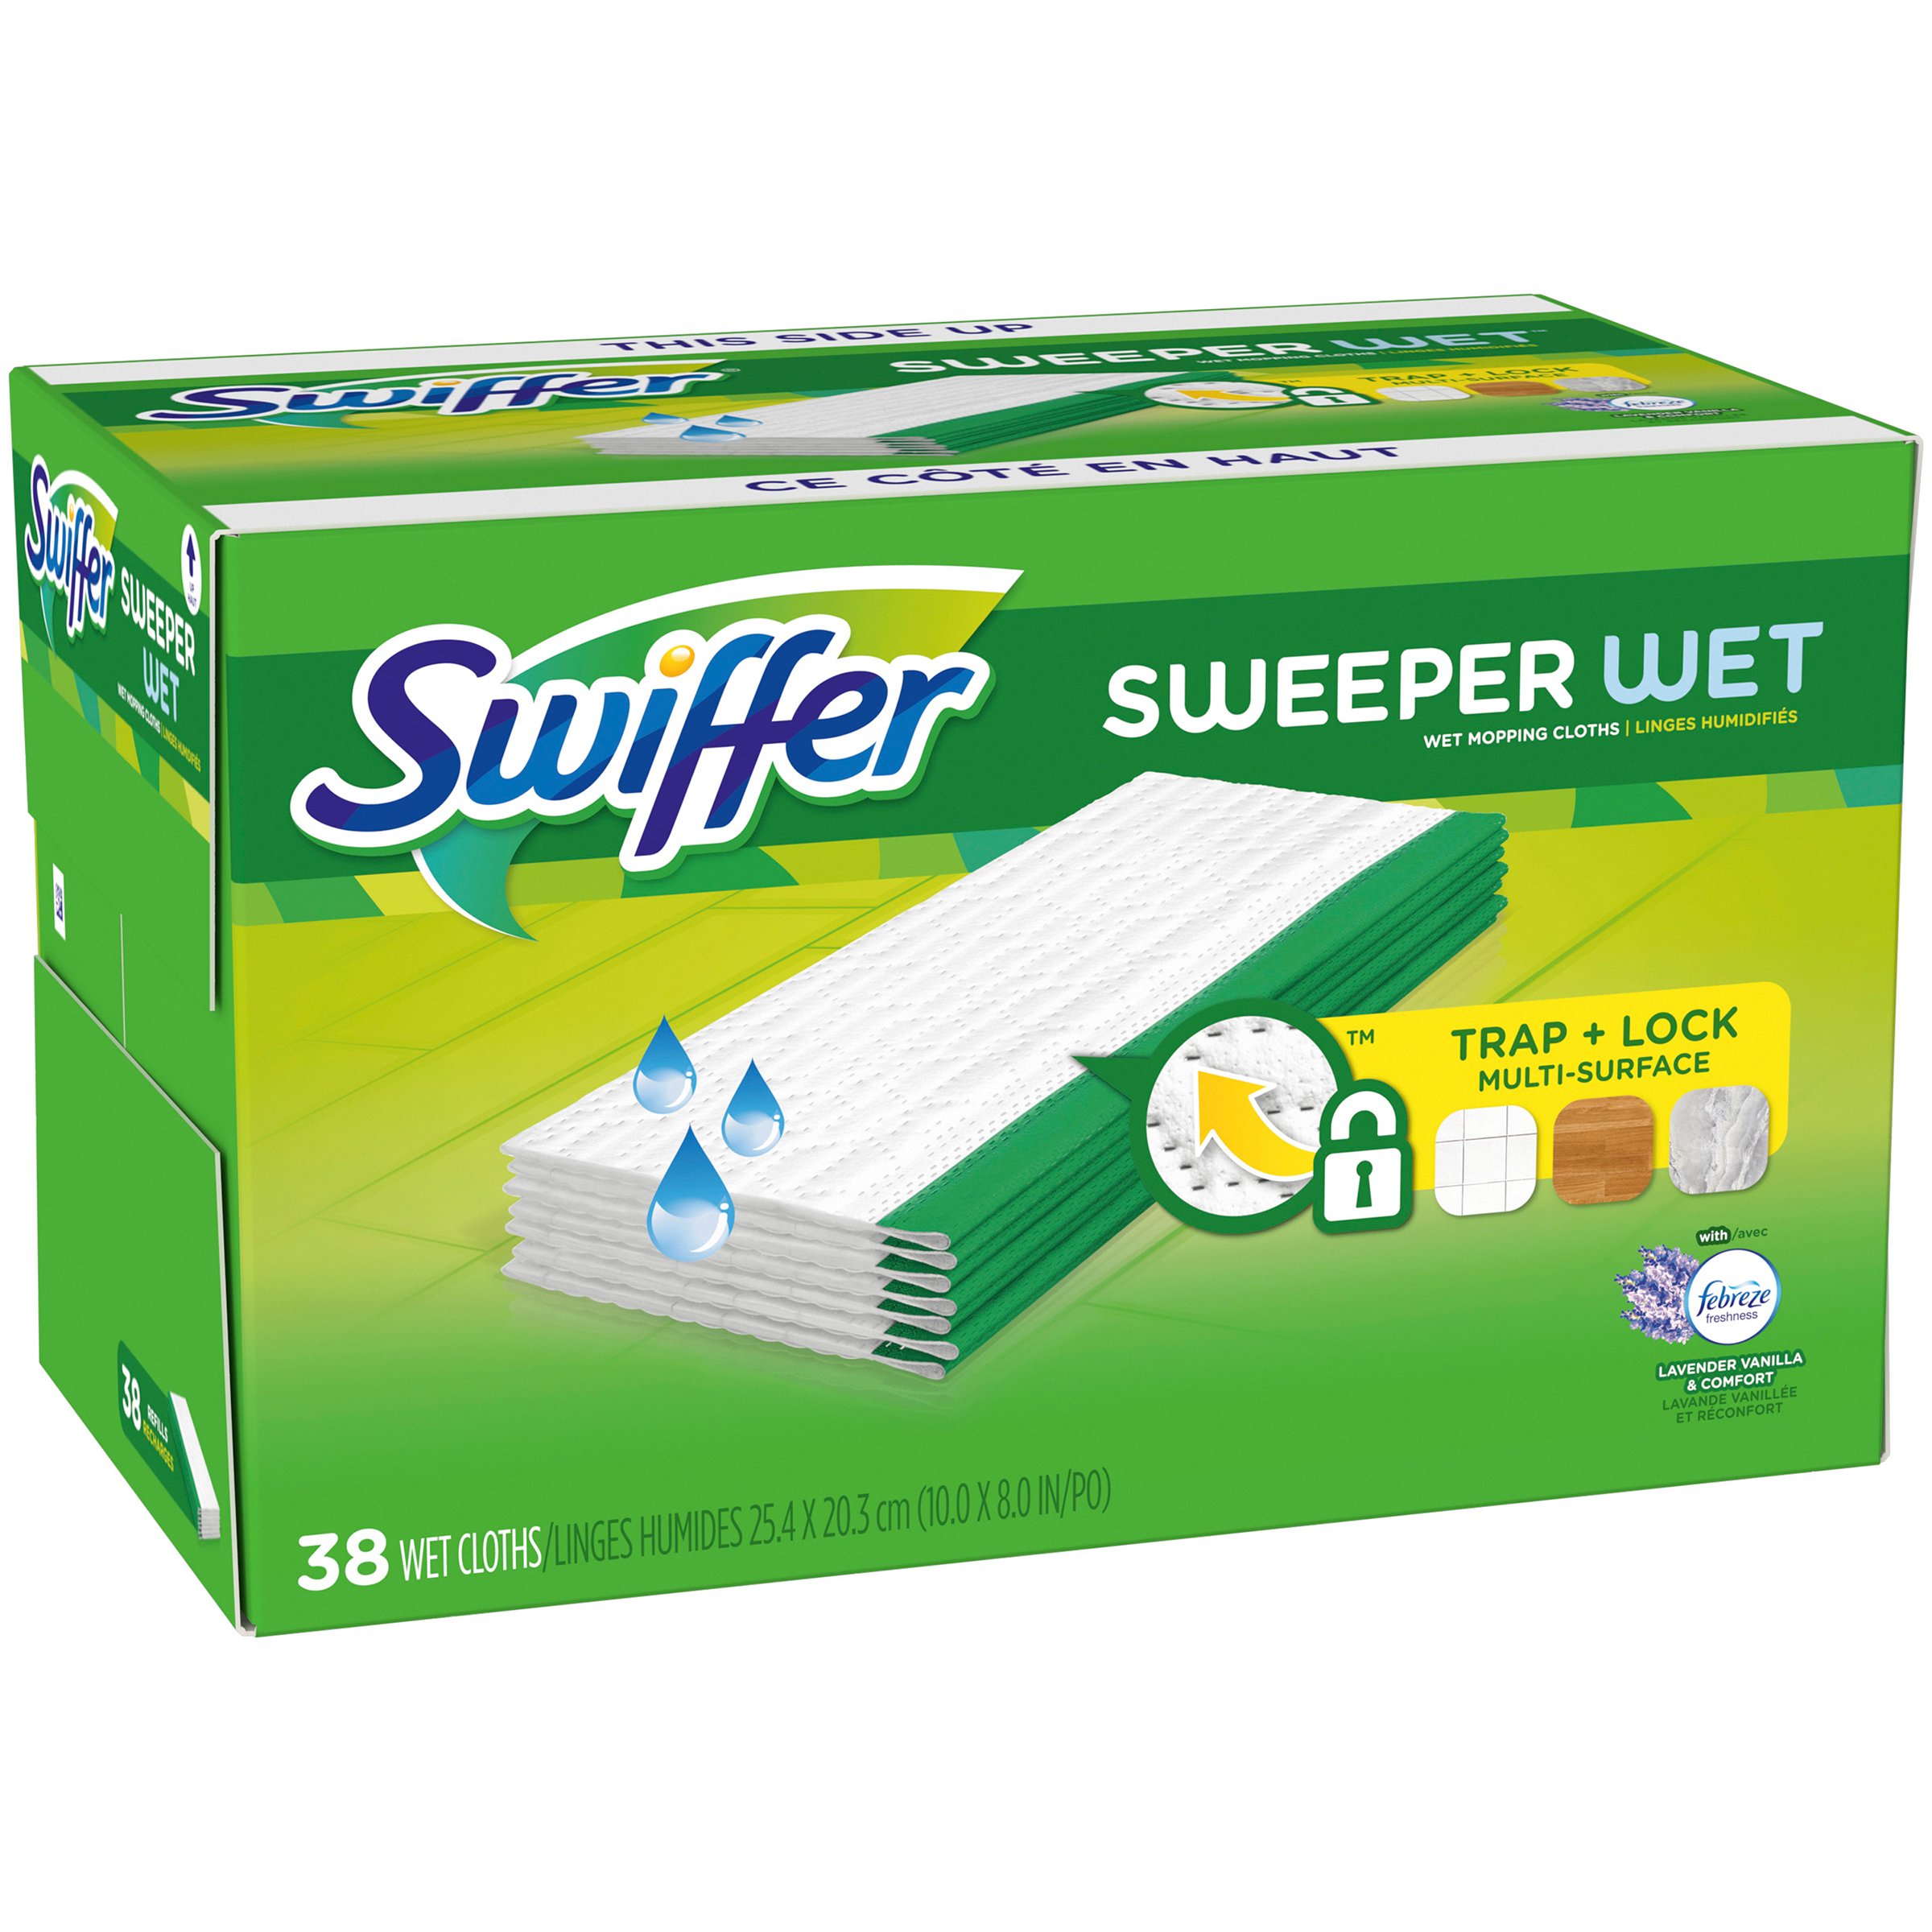 Swiffer Sweeper 2-in-1 Sweep and Mop Starter Kit,1 India